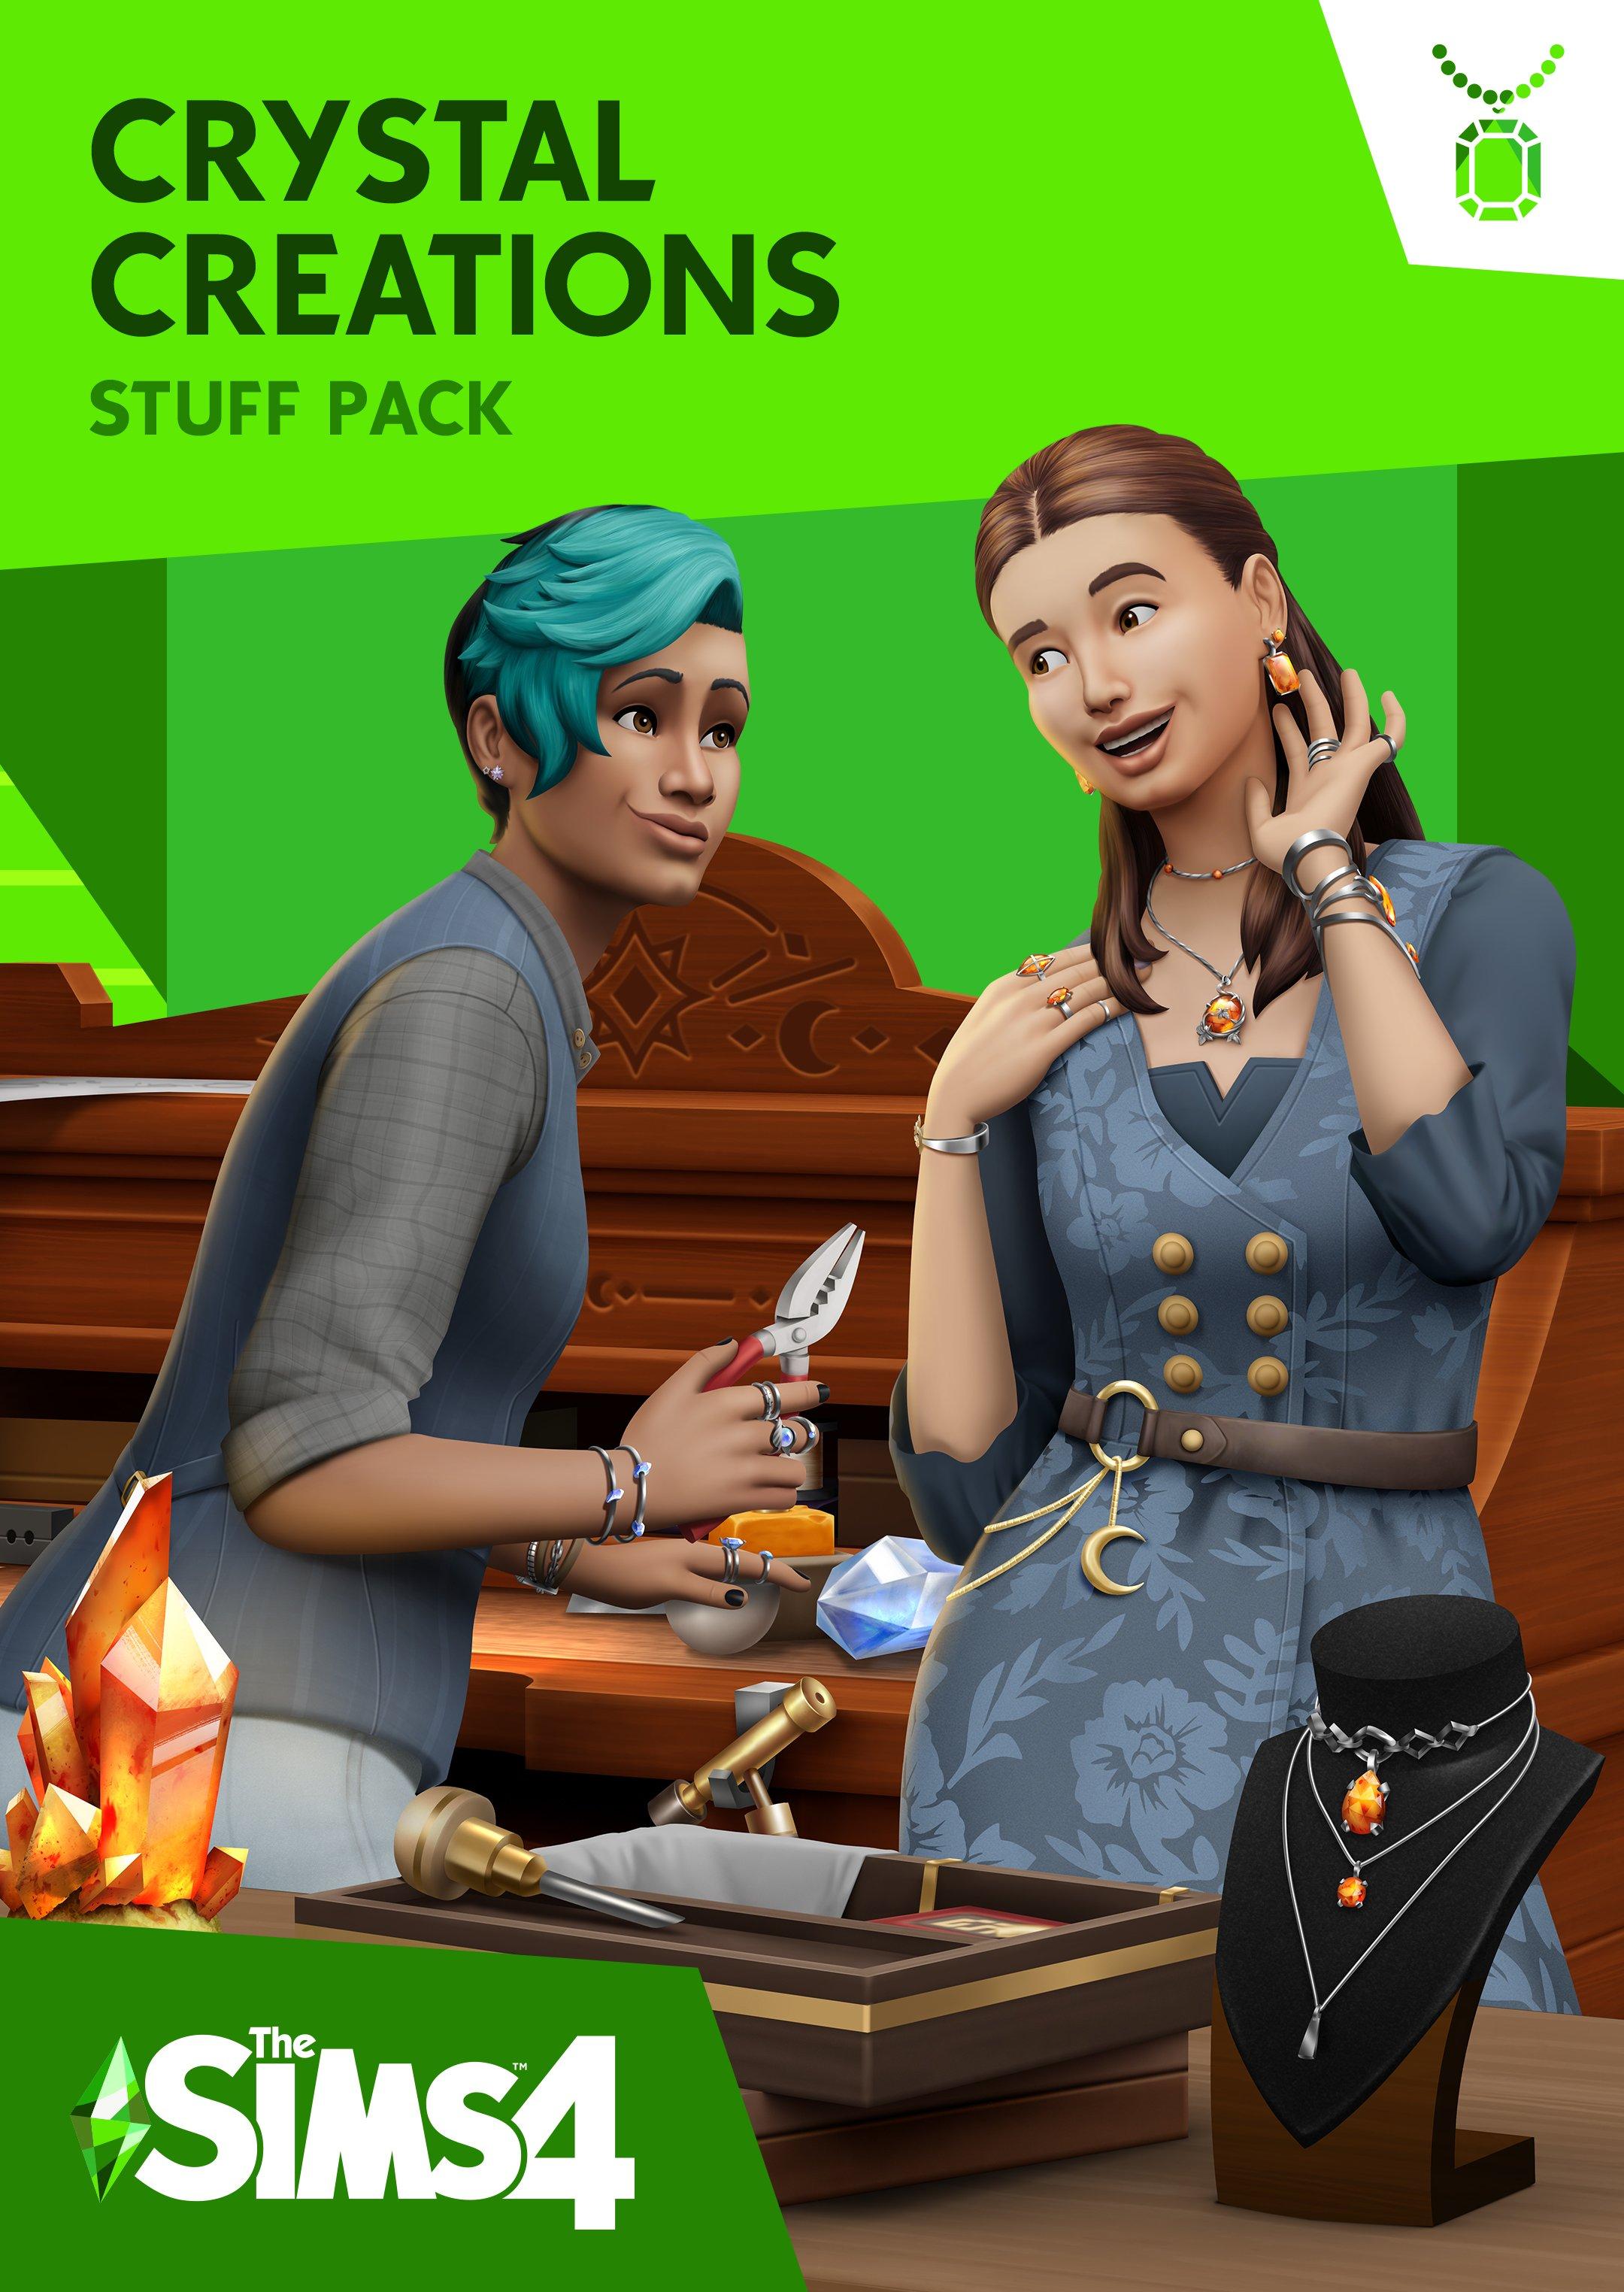 The Sims 4 Crystal Creation Stuff Pack - PC EA app